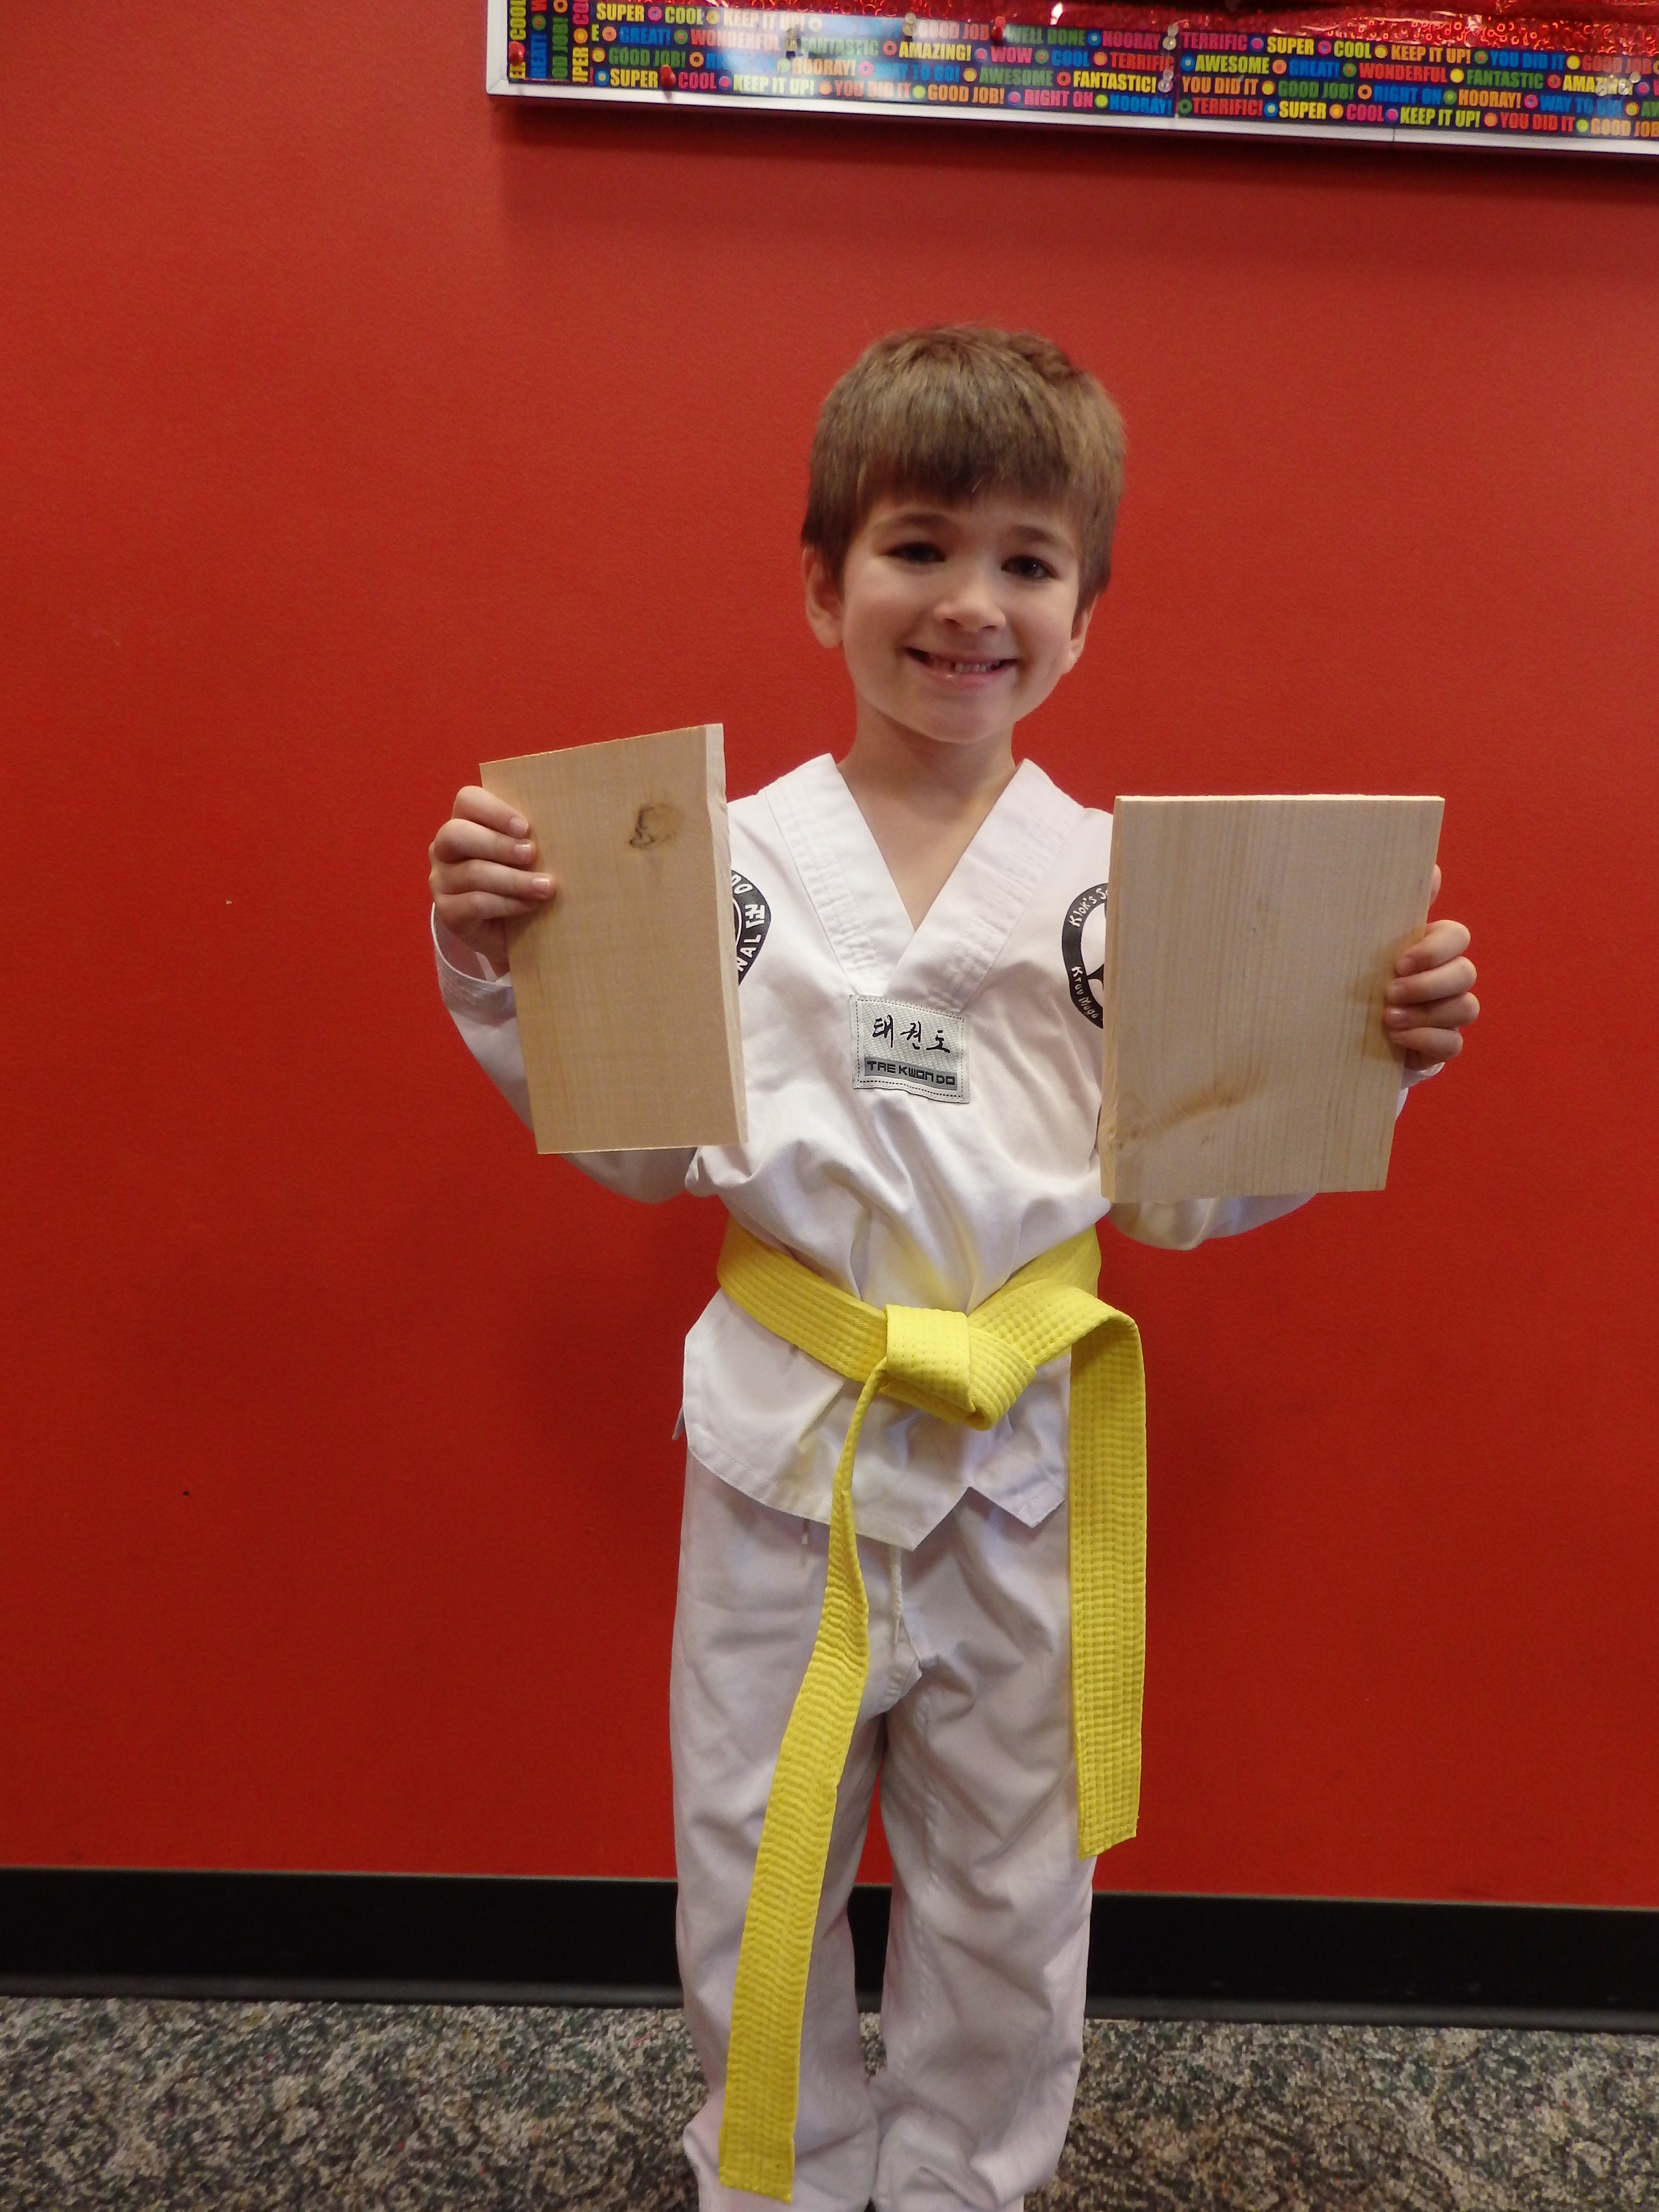 Quest Student Moves Up IN Tae Kwon Do